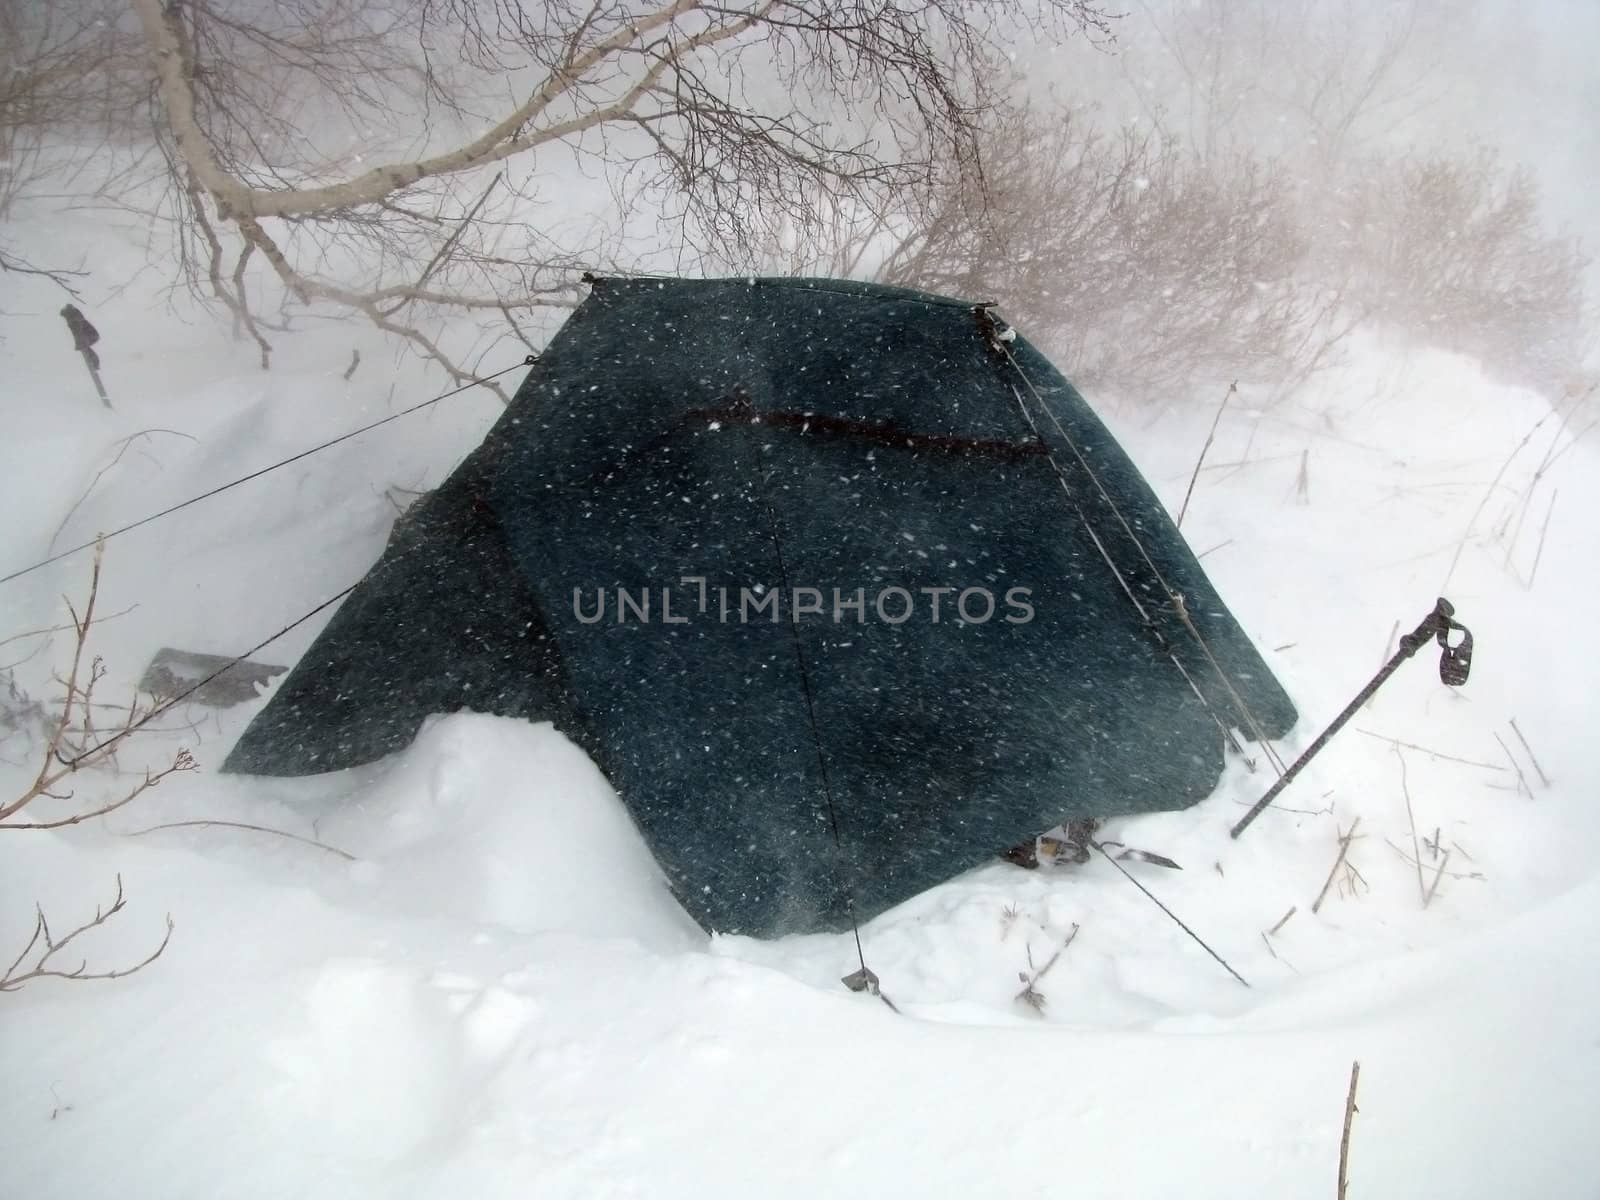 extreme, winter; wood, birch, tent, tree, snow, nature; landscape; type; background; beauty; panorama, snowstorm, blizzard, journey, expedition, is bored, wind